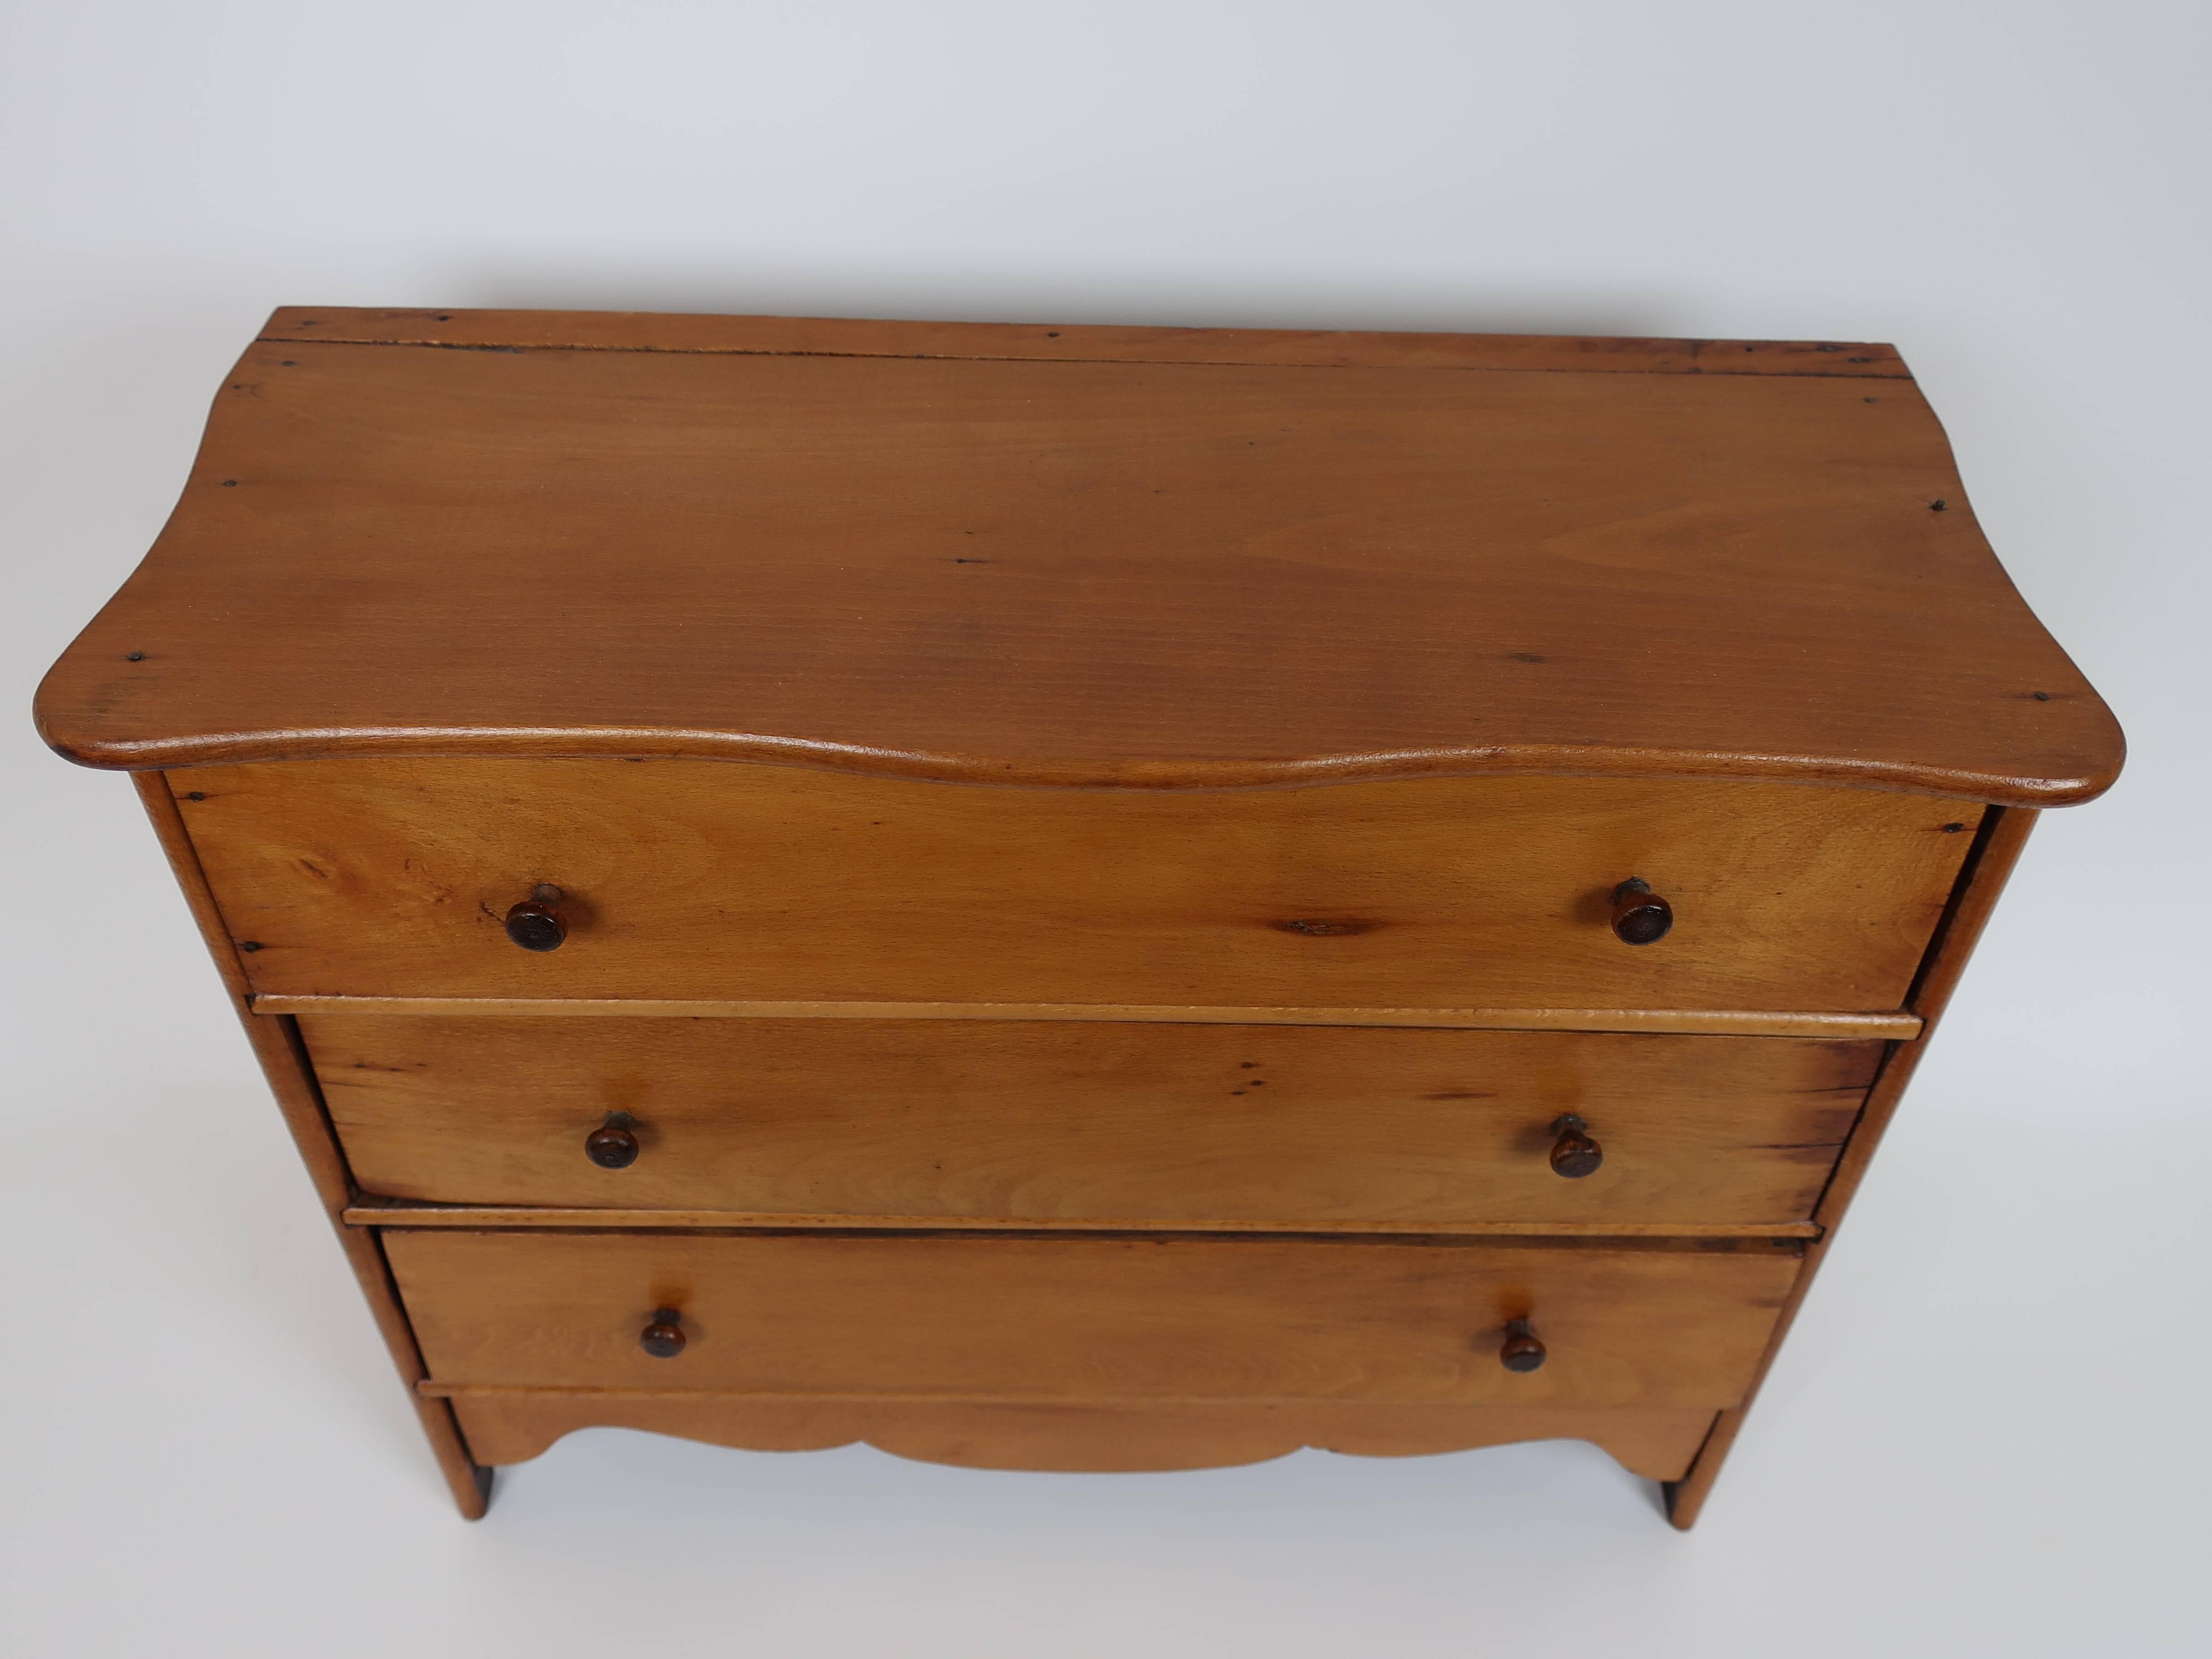 Miniature pine chest from New England with shaped top, delicate turned button pulls and scalloped apron. The finish is original with a lovely patina and the scale is delightful.